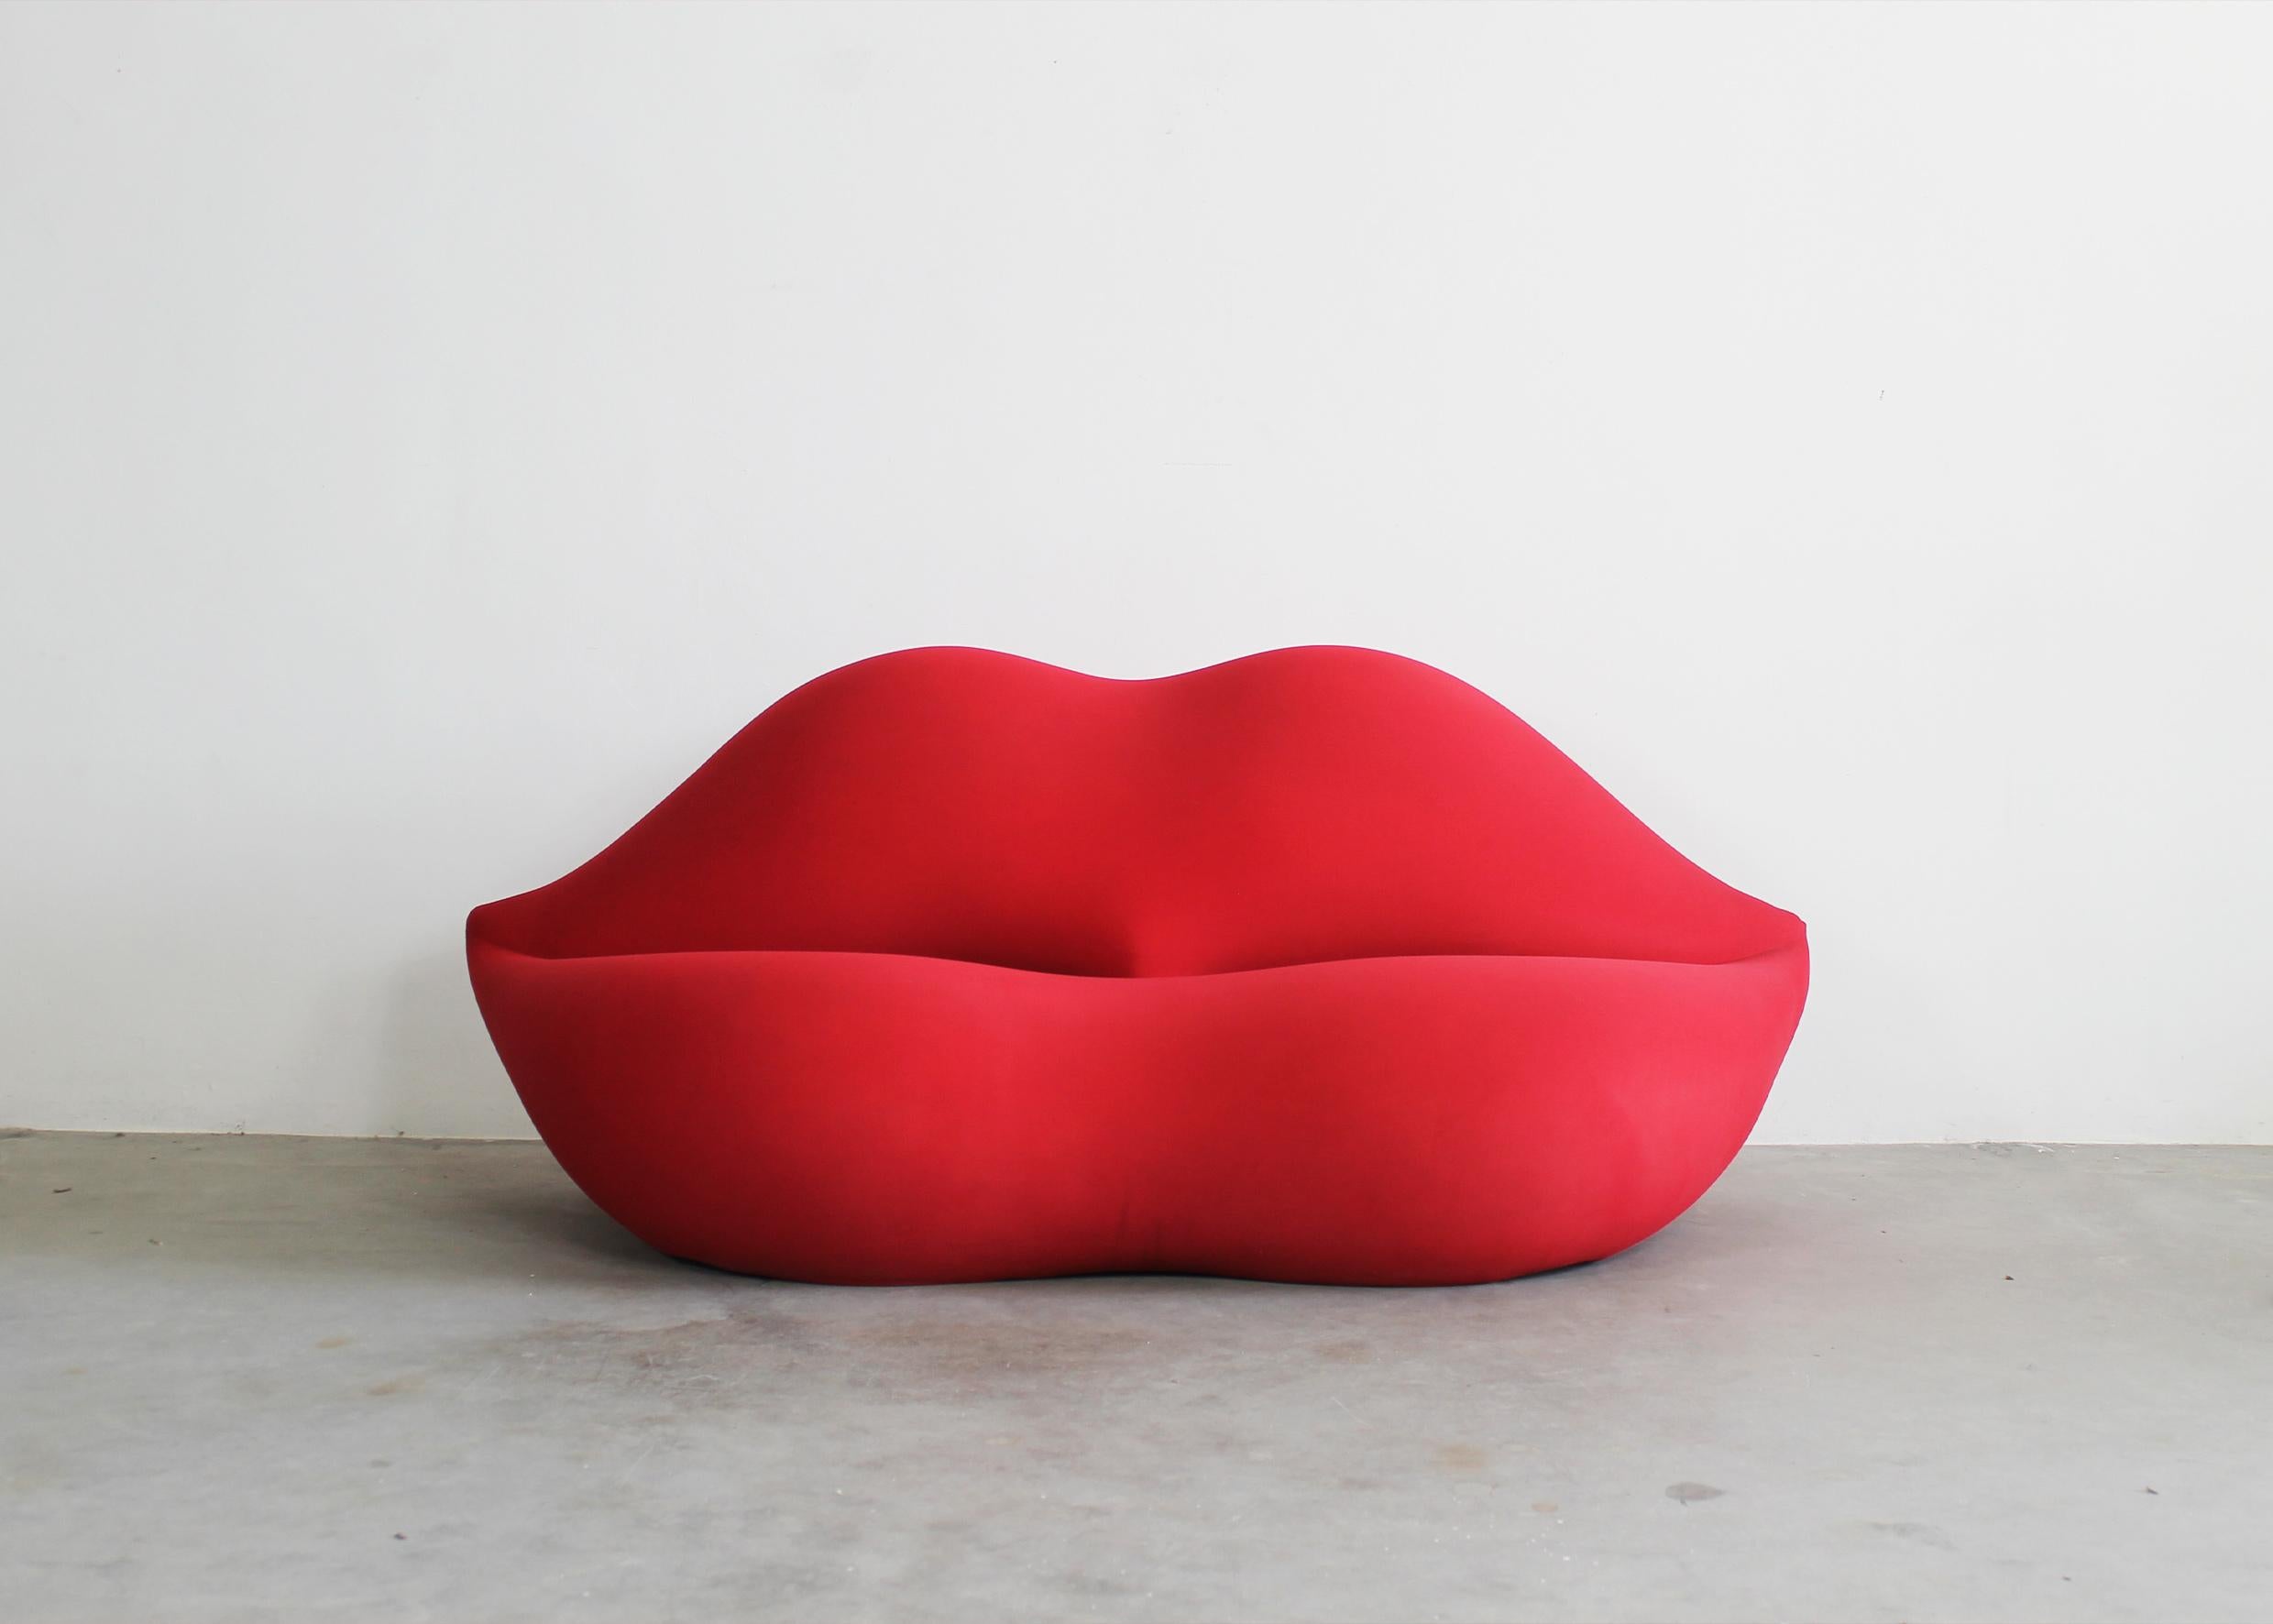 Bocca or Marilyn sofa with structure in expanded polyurethane foam covered with red fabric, the cover is completely removable.
This sofa was designed by Studio 65 and produced by Gufram in the 1970s. 

This iconic sofa shaped like as a giant lips